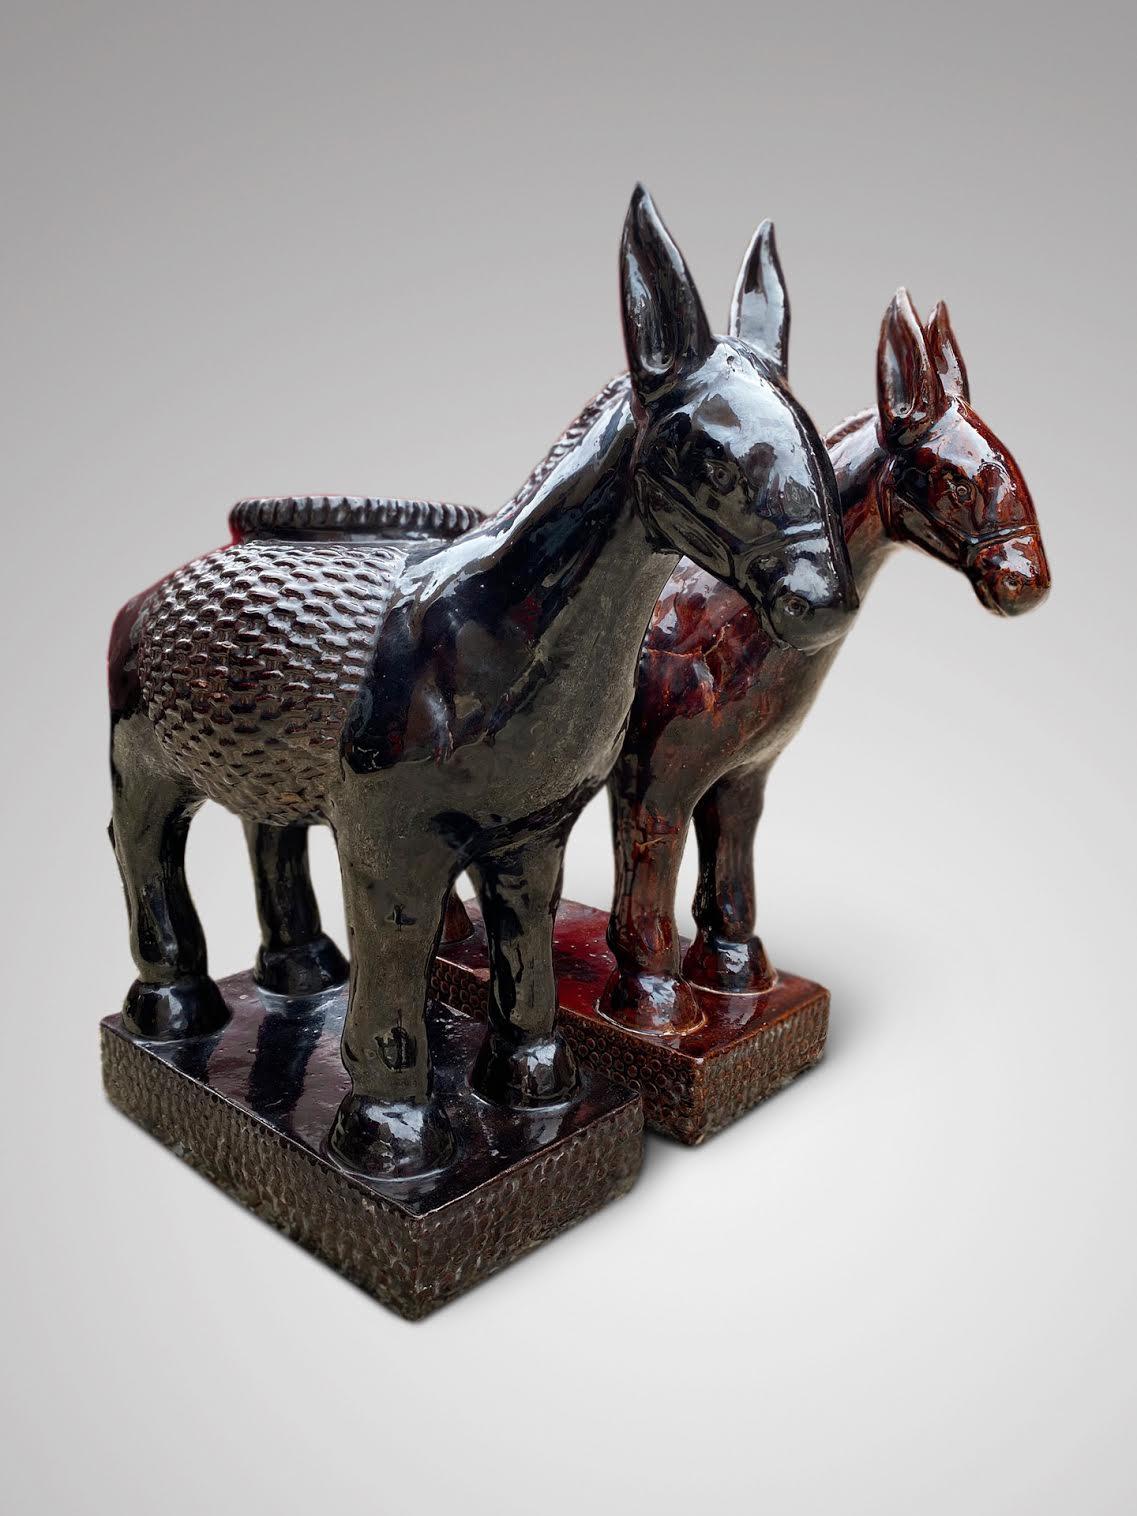 A pair of very decorative 20th century brown and black glazed pottery jardinieres or plant stands modelled as donkeys. Can be sold separately.

The dimensions are:
Height: 73cm (28.7in)
Width: 72cm (28.3in)
Depth: 33cm (13.0in)

In good antique